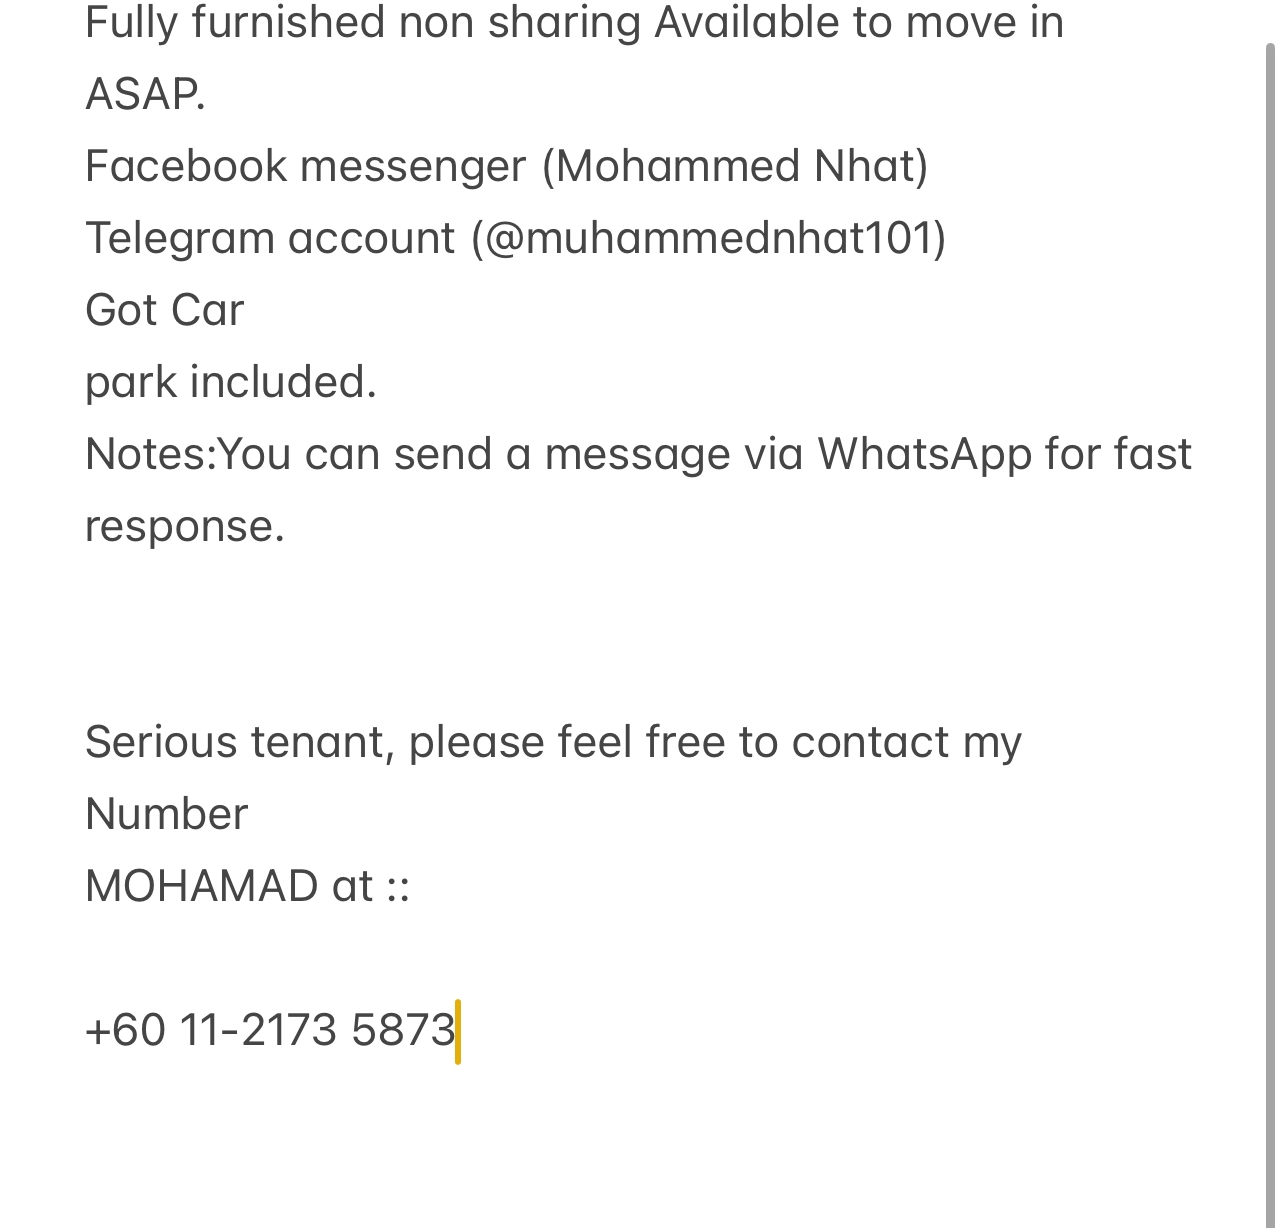 room for rent, master room, danau murni condominium, Send the owner a message on WhatsApp/facebook if you want to RENT the unit facebook (Mohammed Nhat)&Telegram(@muhammednhat101) Fully furnished non sharing :(comfortable)